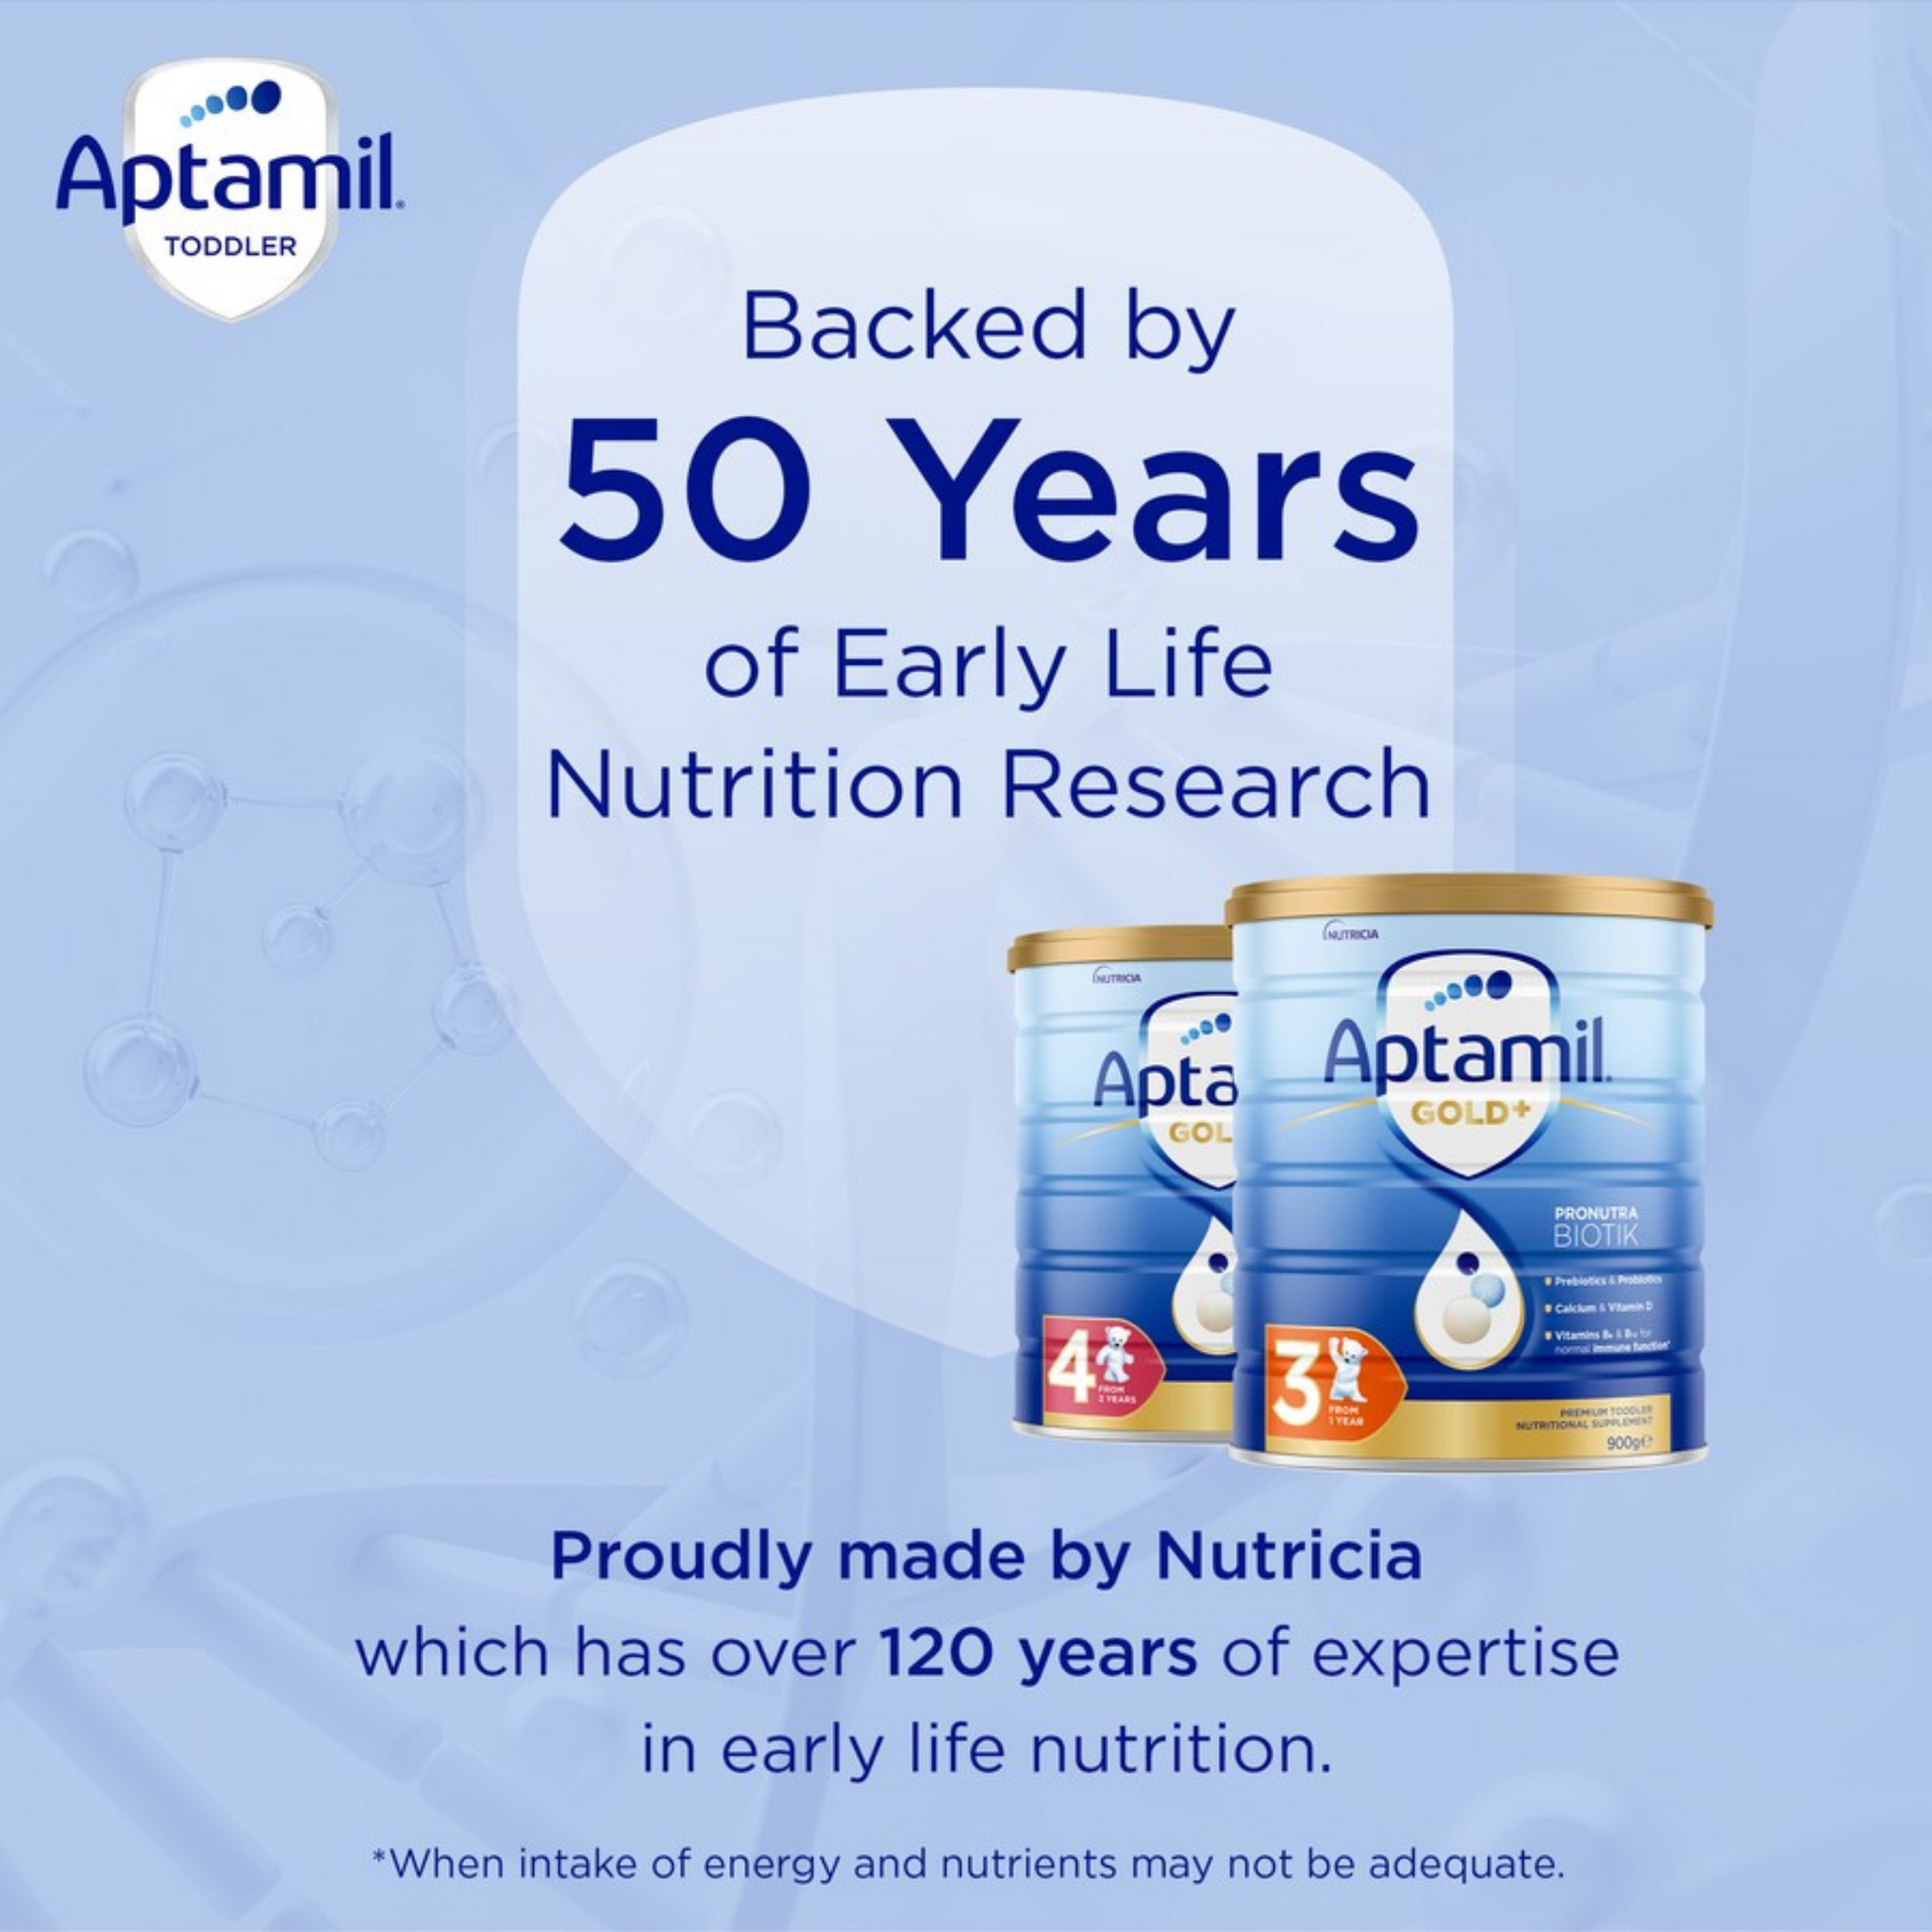 Aptamil Gold+ 3 Toddler Milk Formula From 1+ Year is a nutritional supplement premium baby milk formula, suitable for infants from 1 years and over. Halal & vegetarian suitable. Best genuine real authentic Australian New Zealand cow quality safe healthy feeding food powder cheap price in Dhaka Chittagong Bangladesh.